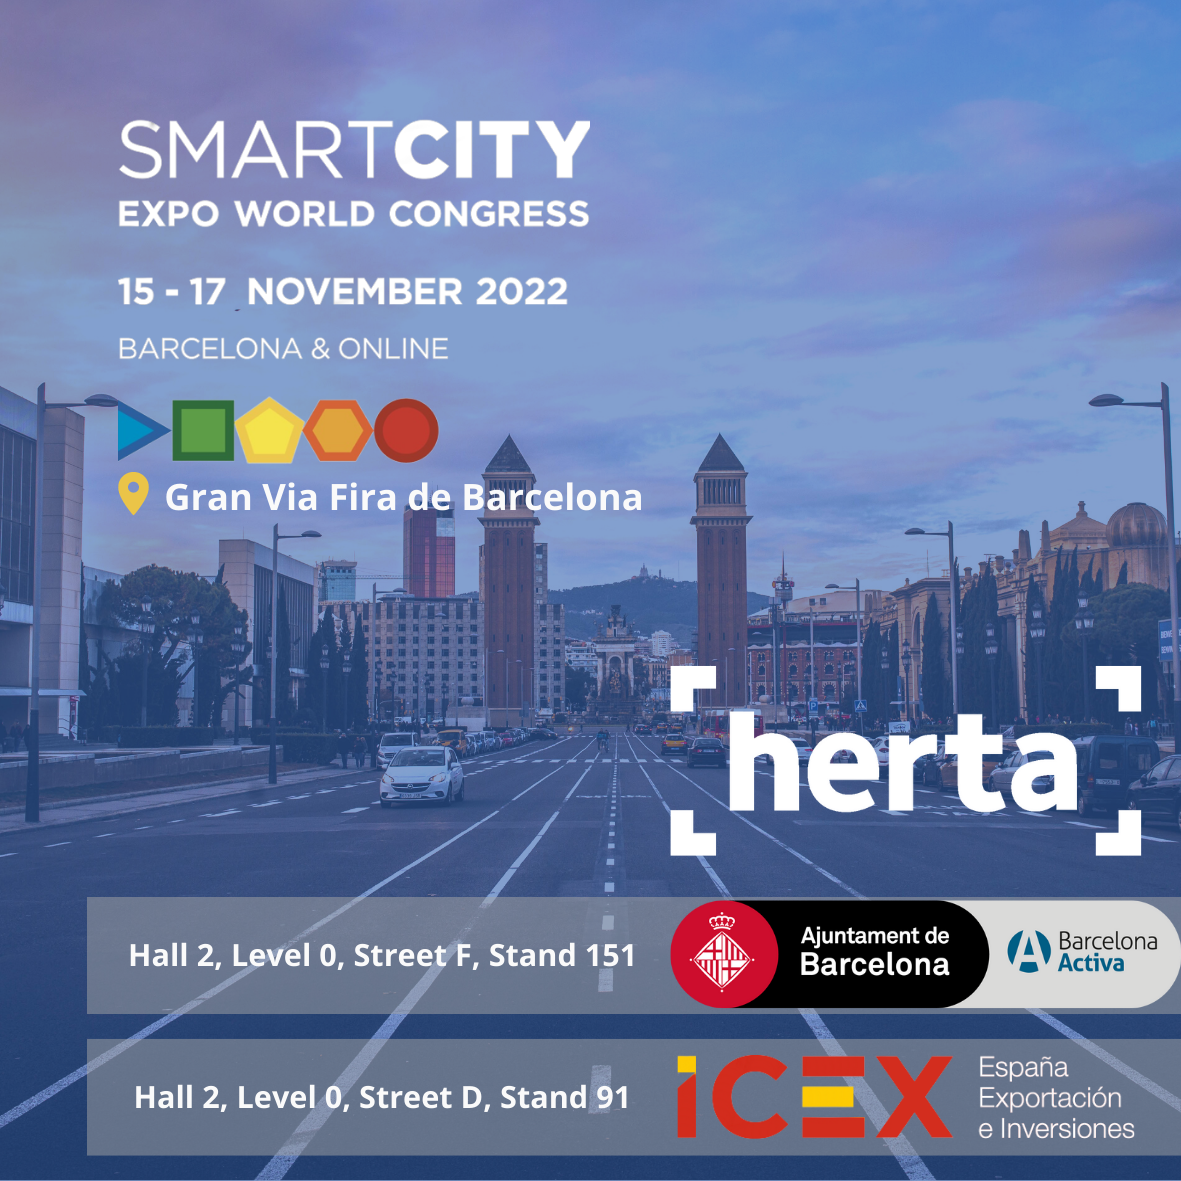 Herta will be exhibiting its facial analysis solutions at  Smart City Expo World Congress